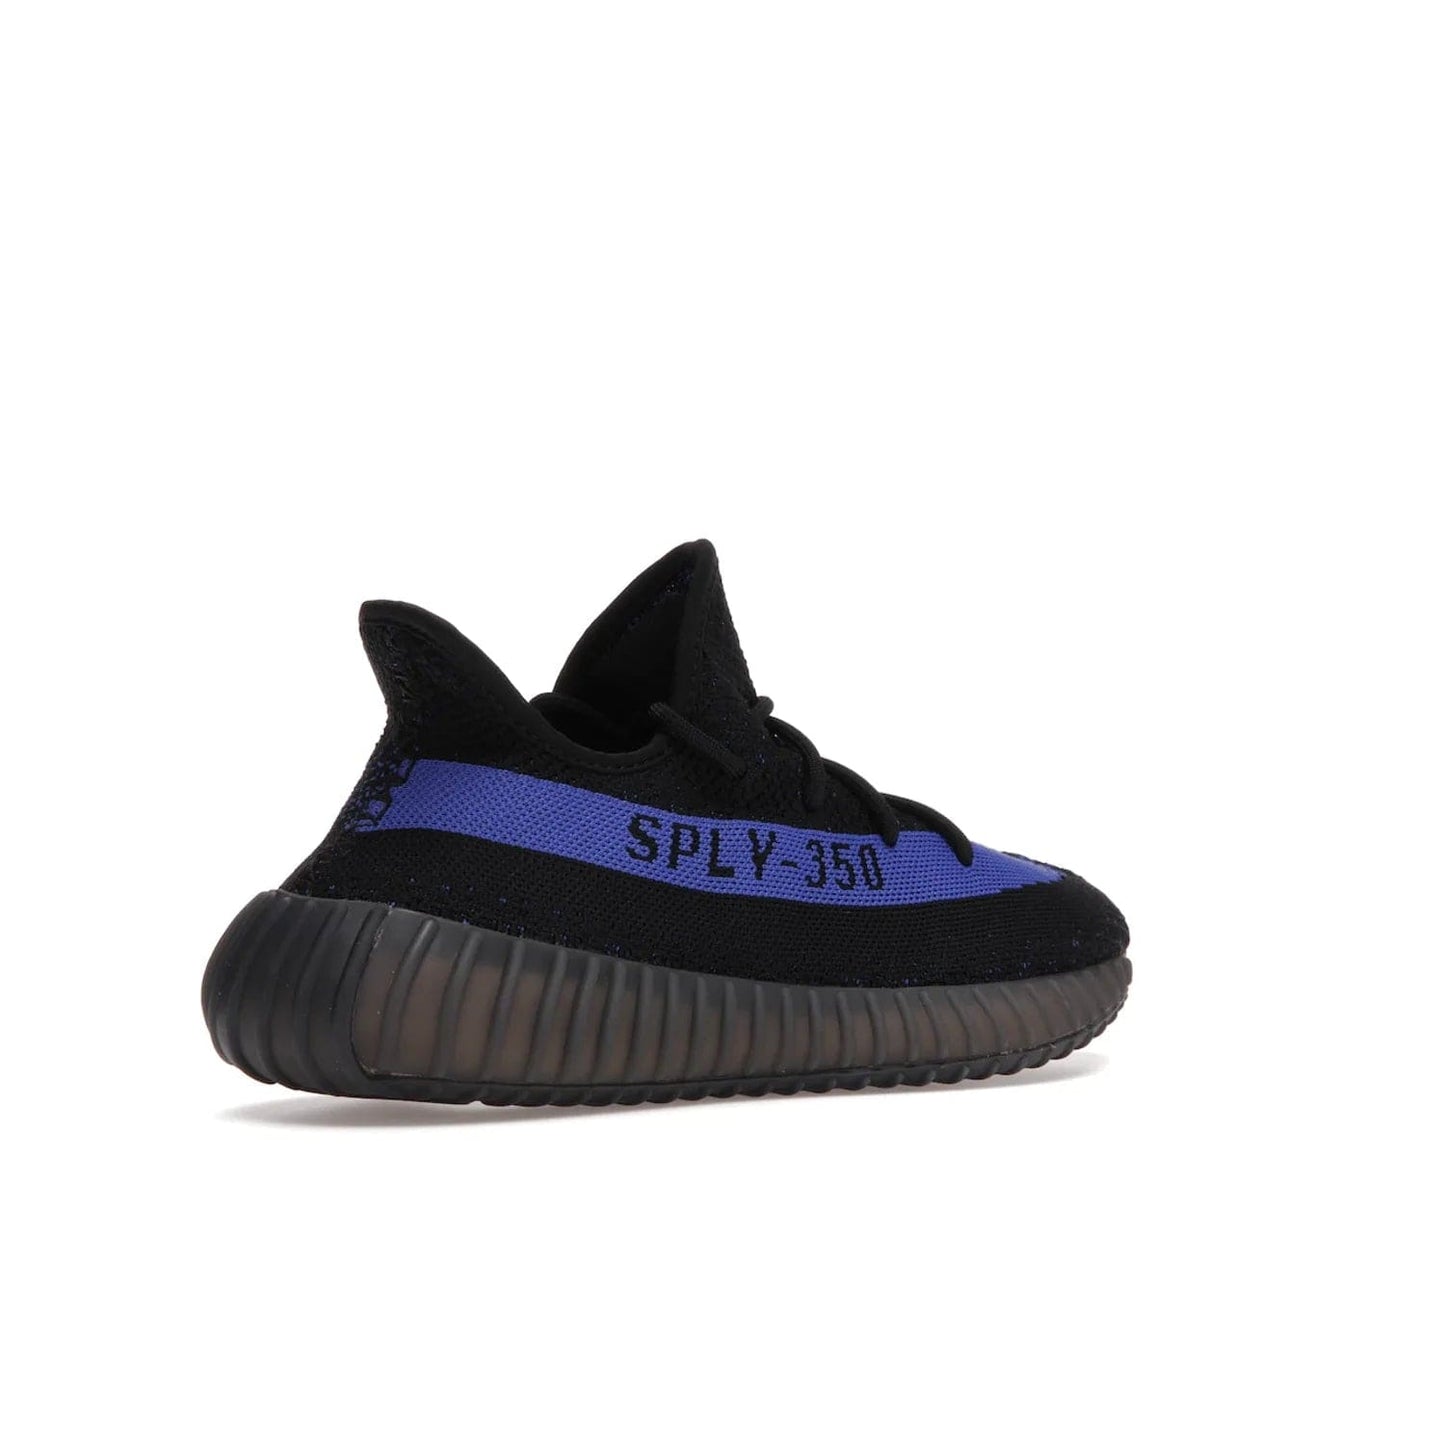 adidas Yeezy Boost 350 V2 Dazzling Blue - Image 33 - Only at www.BallersClubKickz.com - Shop the Adidas Yeezy 350 V2 Dazzling Blue, featuring a solid black Primeknit upper, Dazzling Blue side stripe, “SPLY-350” text, and a muted Boost sole. Releasing Feb 2022, this style is perfect for any shoe fan.